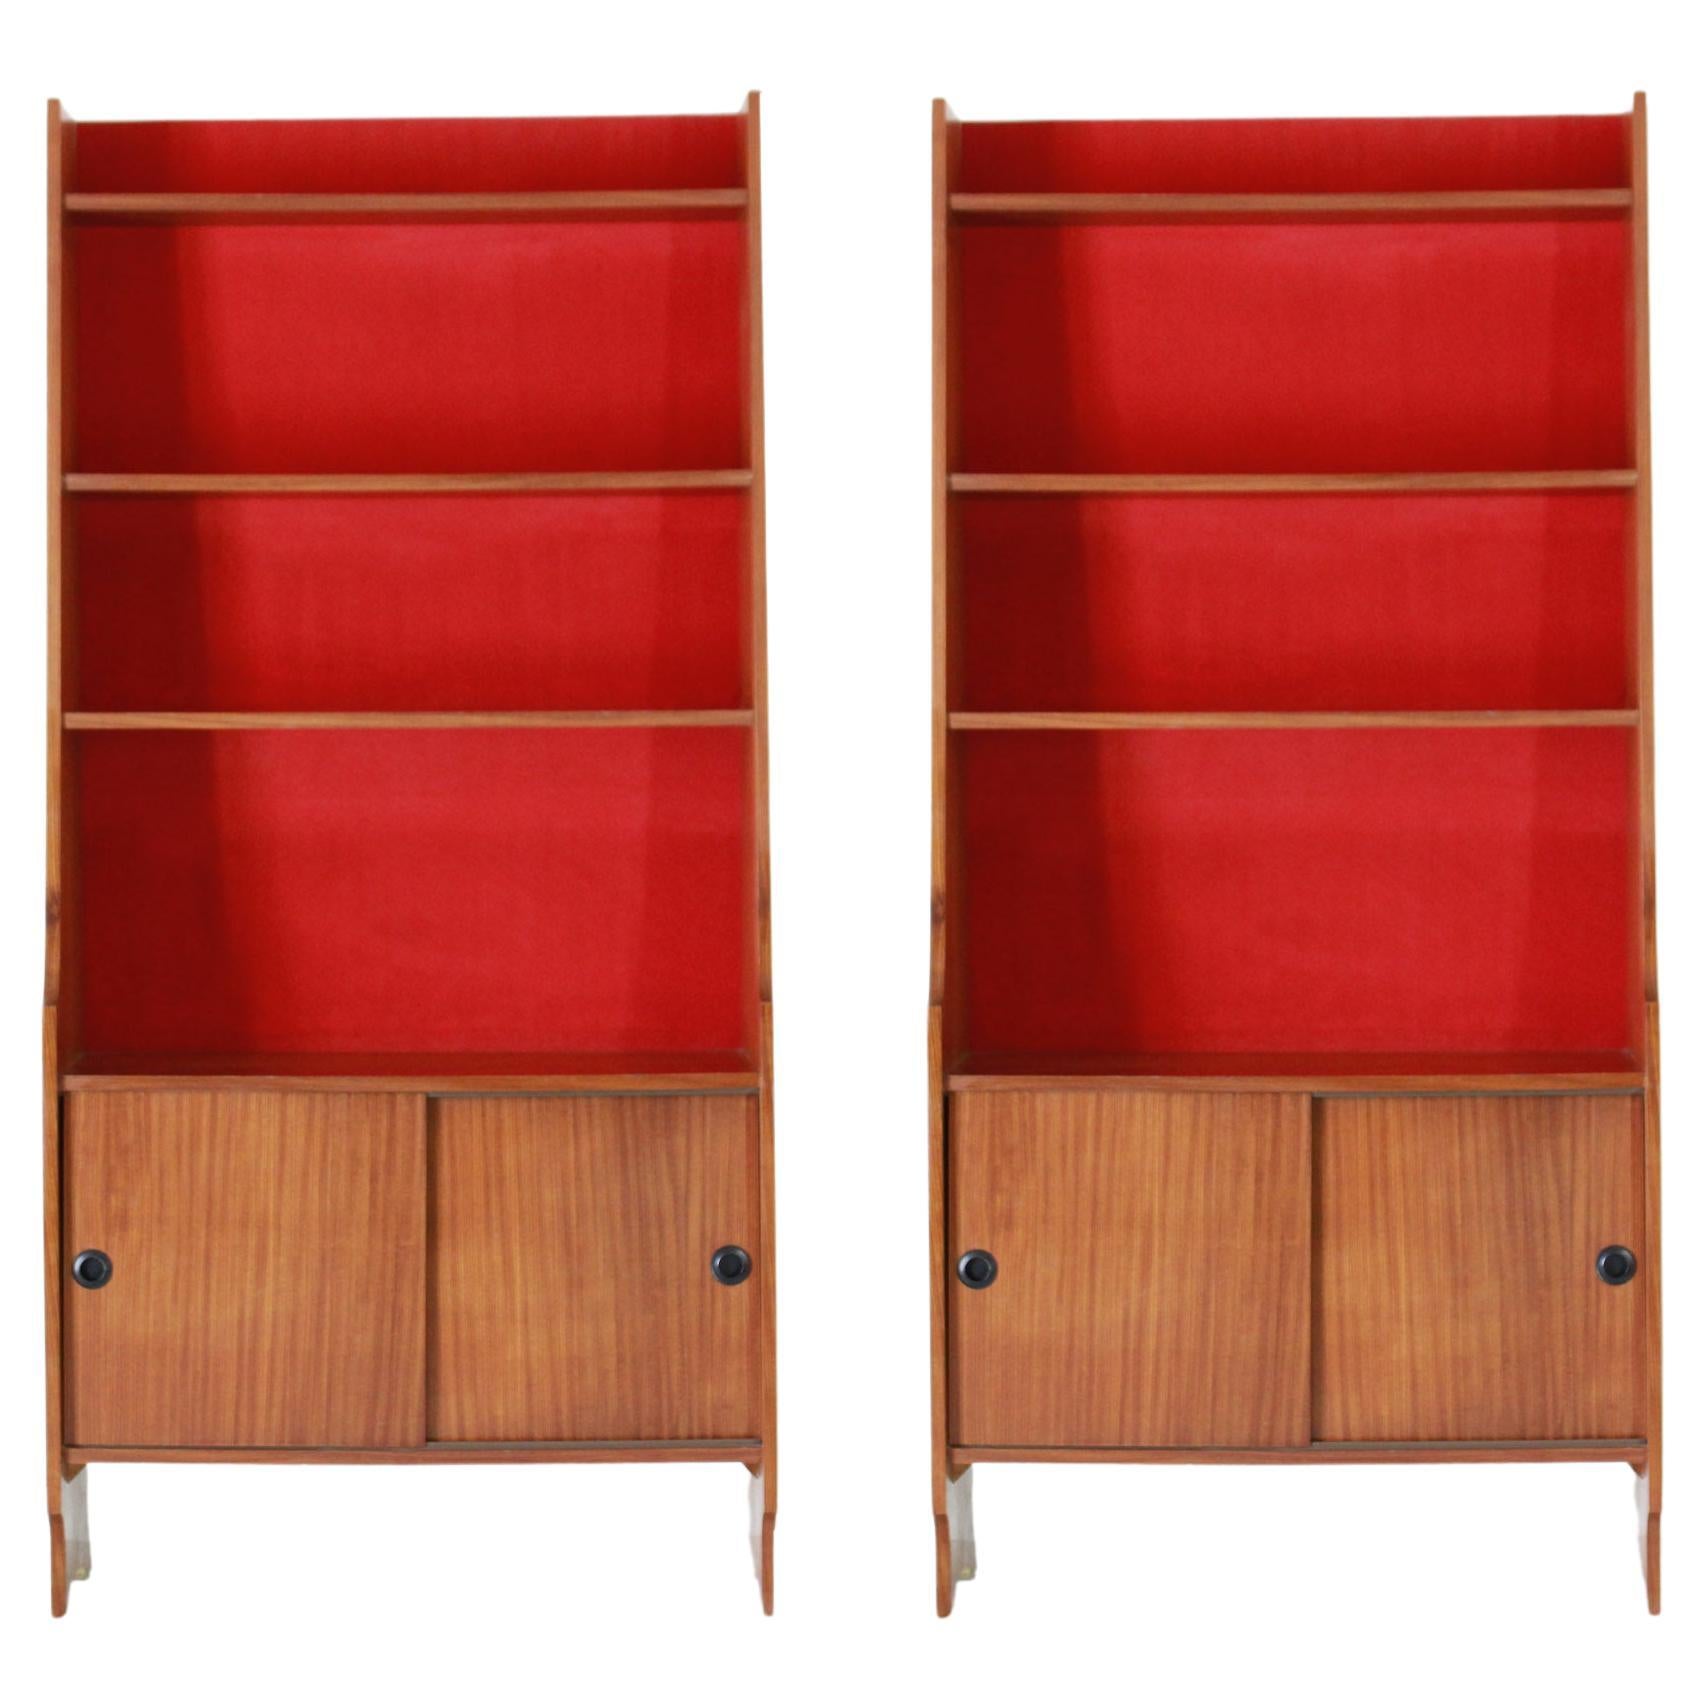 Vintage bookcase, Velvet and wood, Italy 1950s